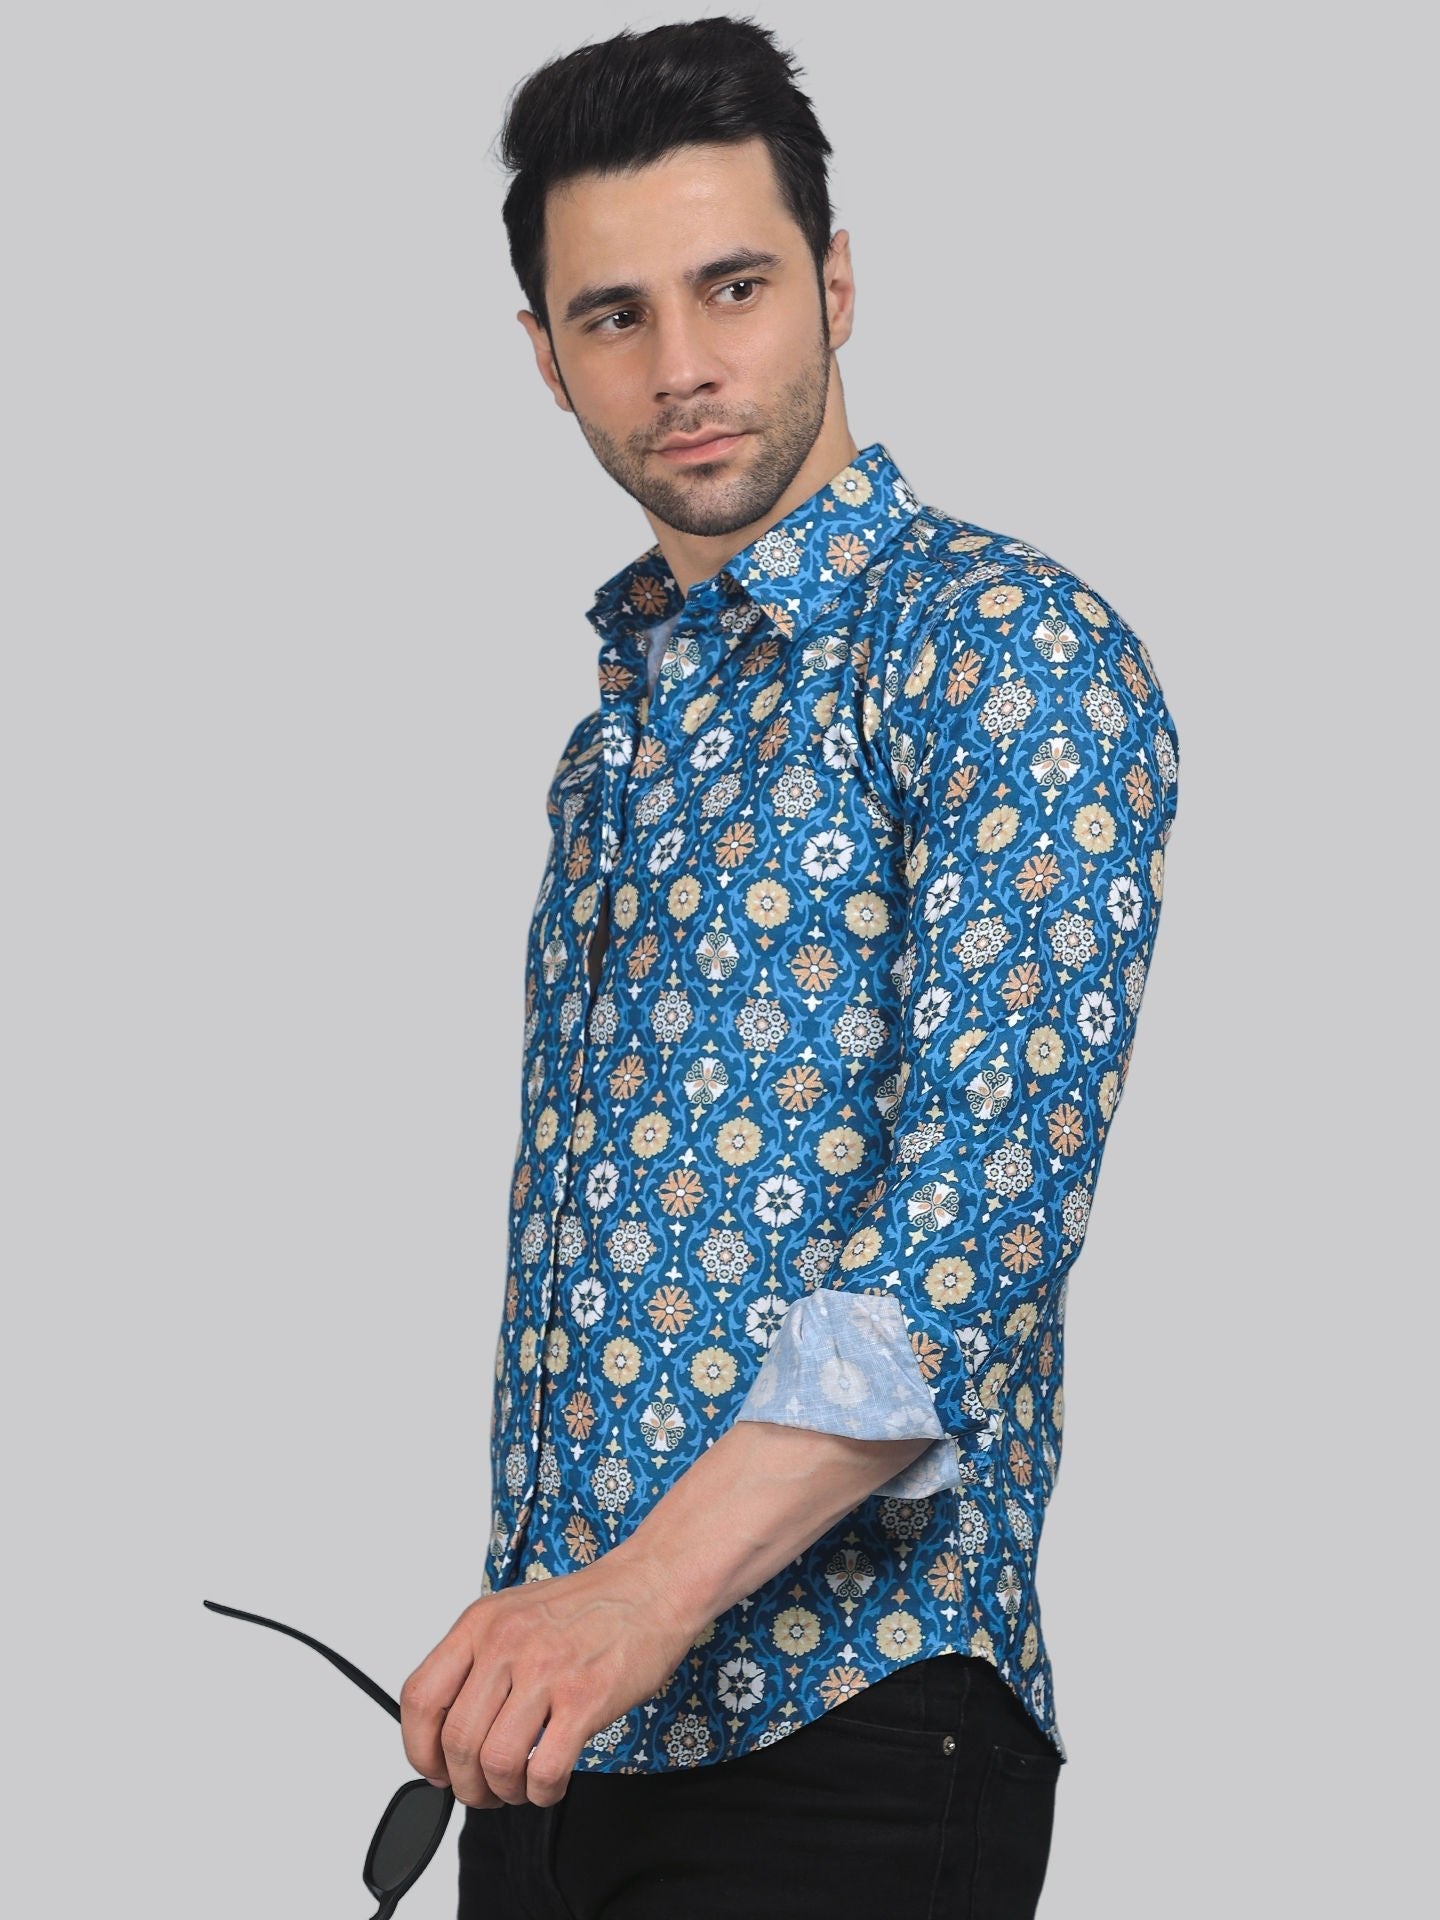 TryBuy Men's Comfy Designer Linen Casual Printed Full Sleeves Shirt - TryBuy® USA🇺🇸